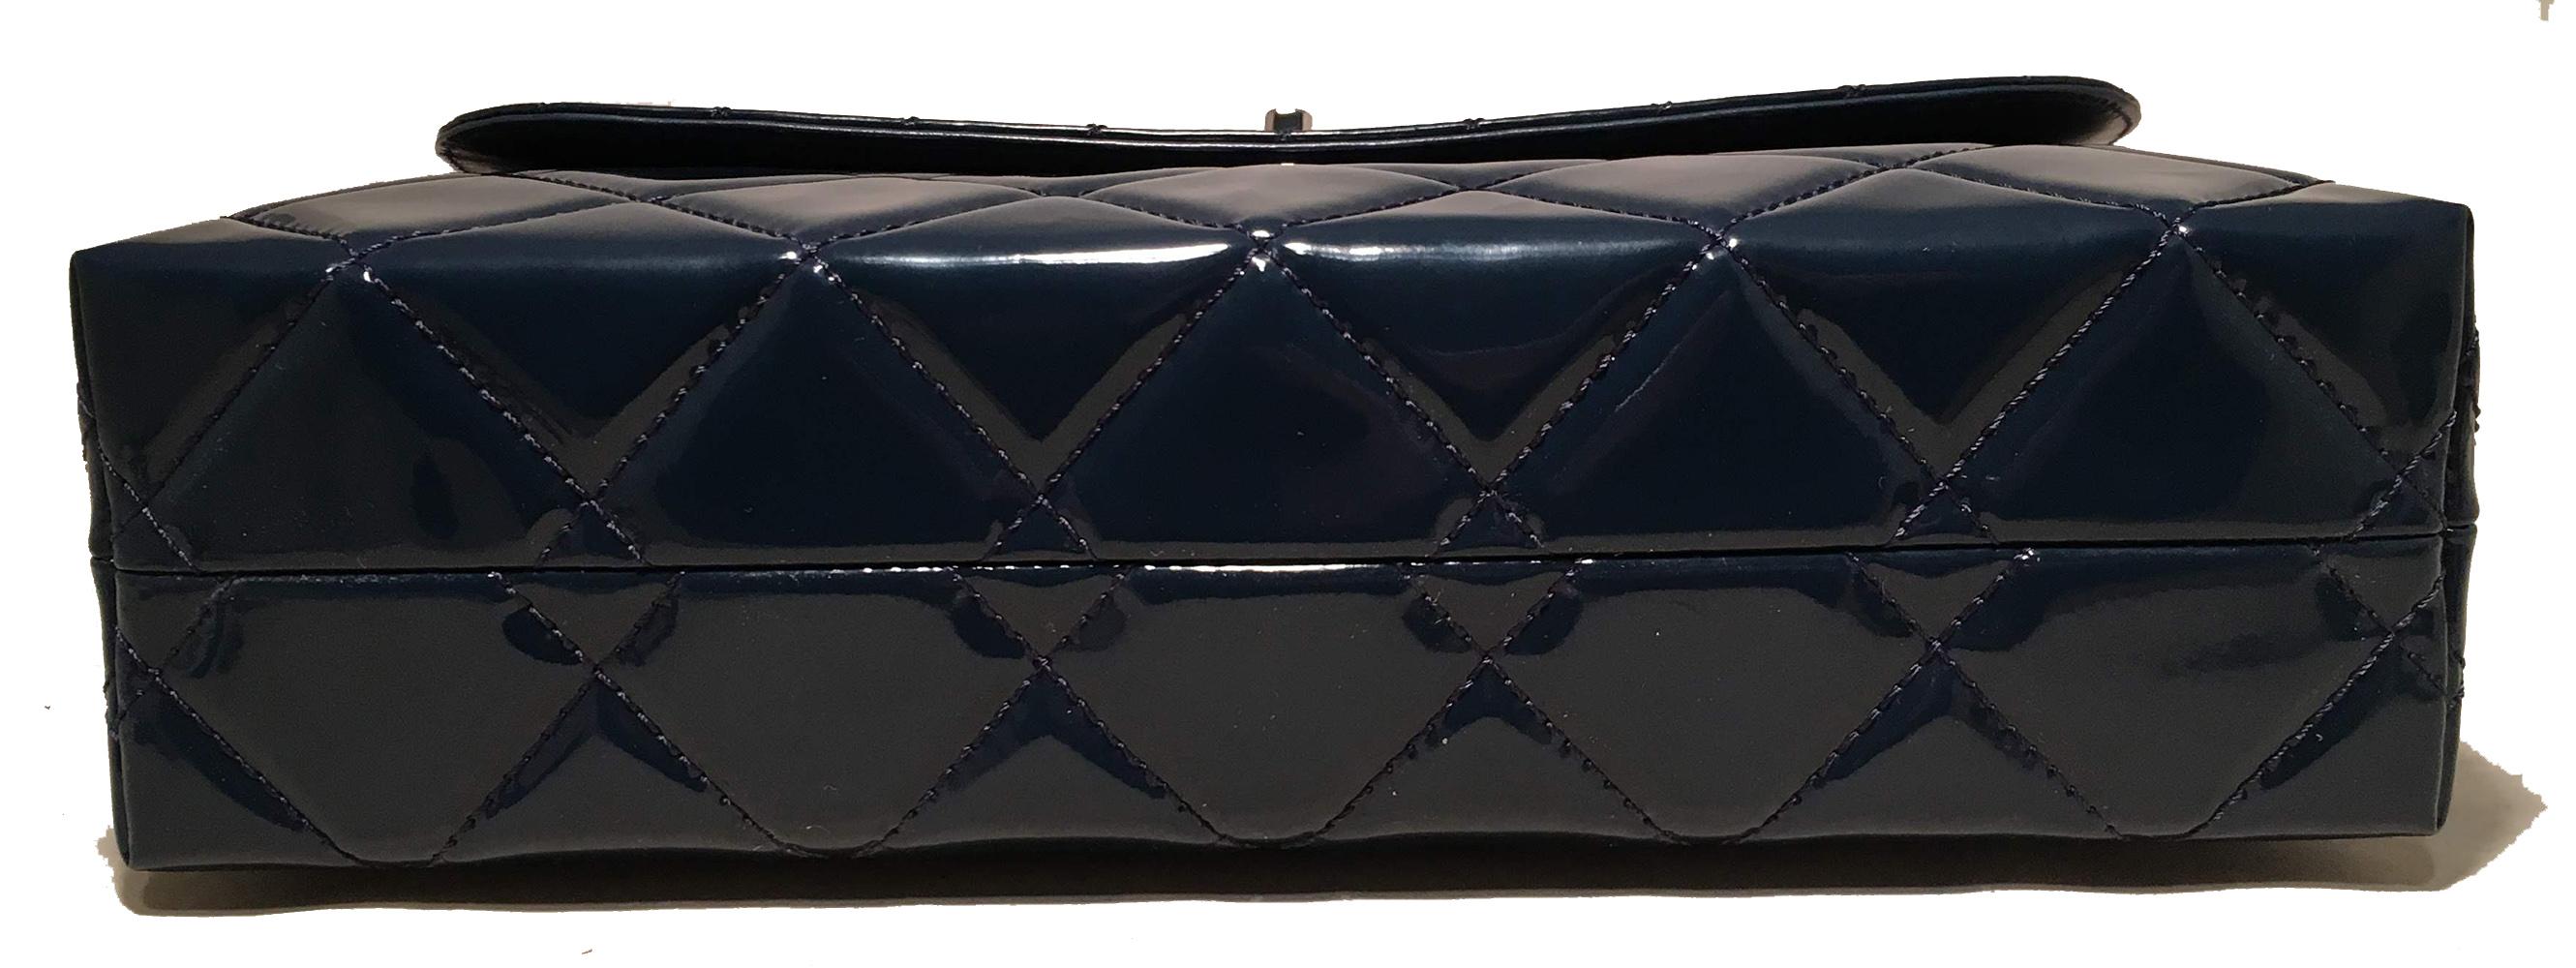 Chanel Marine Navy Patent Leather Jumbo Classic Flap Shoulder Bag In Excellent Condition In Philadelphia, PA